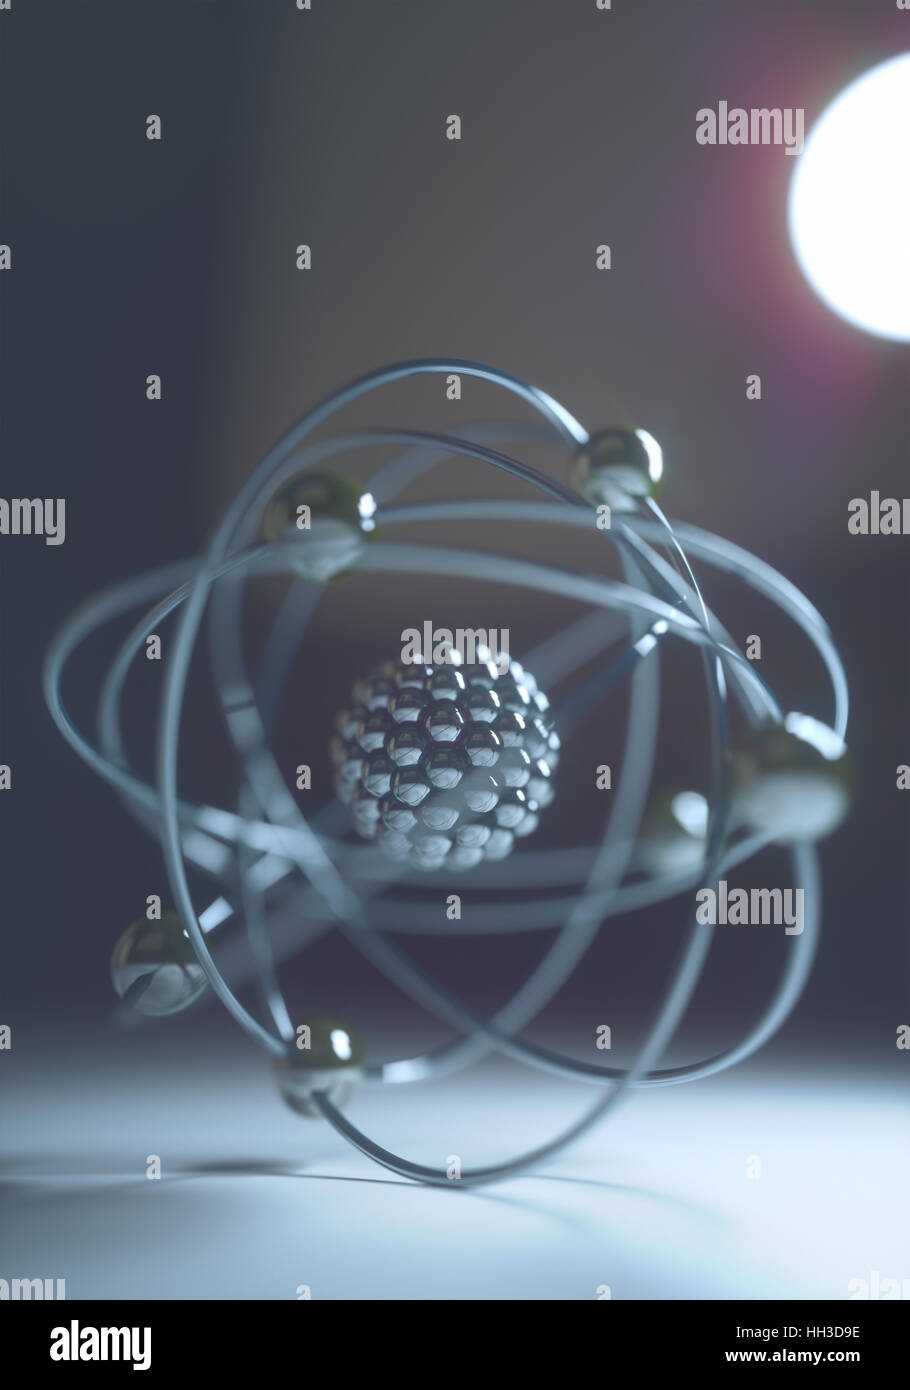 Atomic model in balance with back light. Concept image of physics and chemistry. Stock Photo